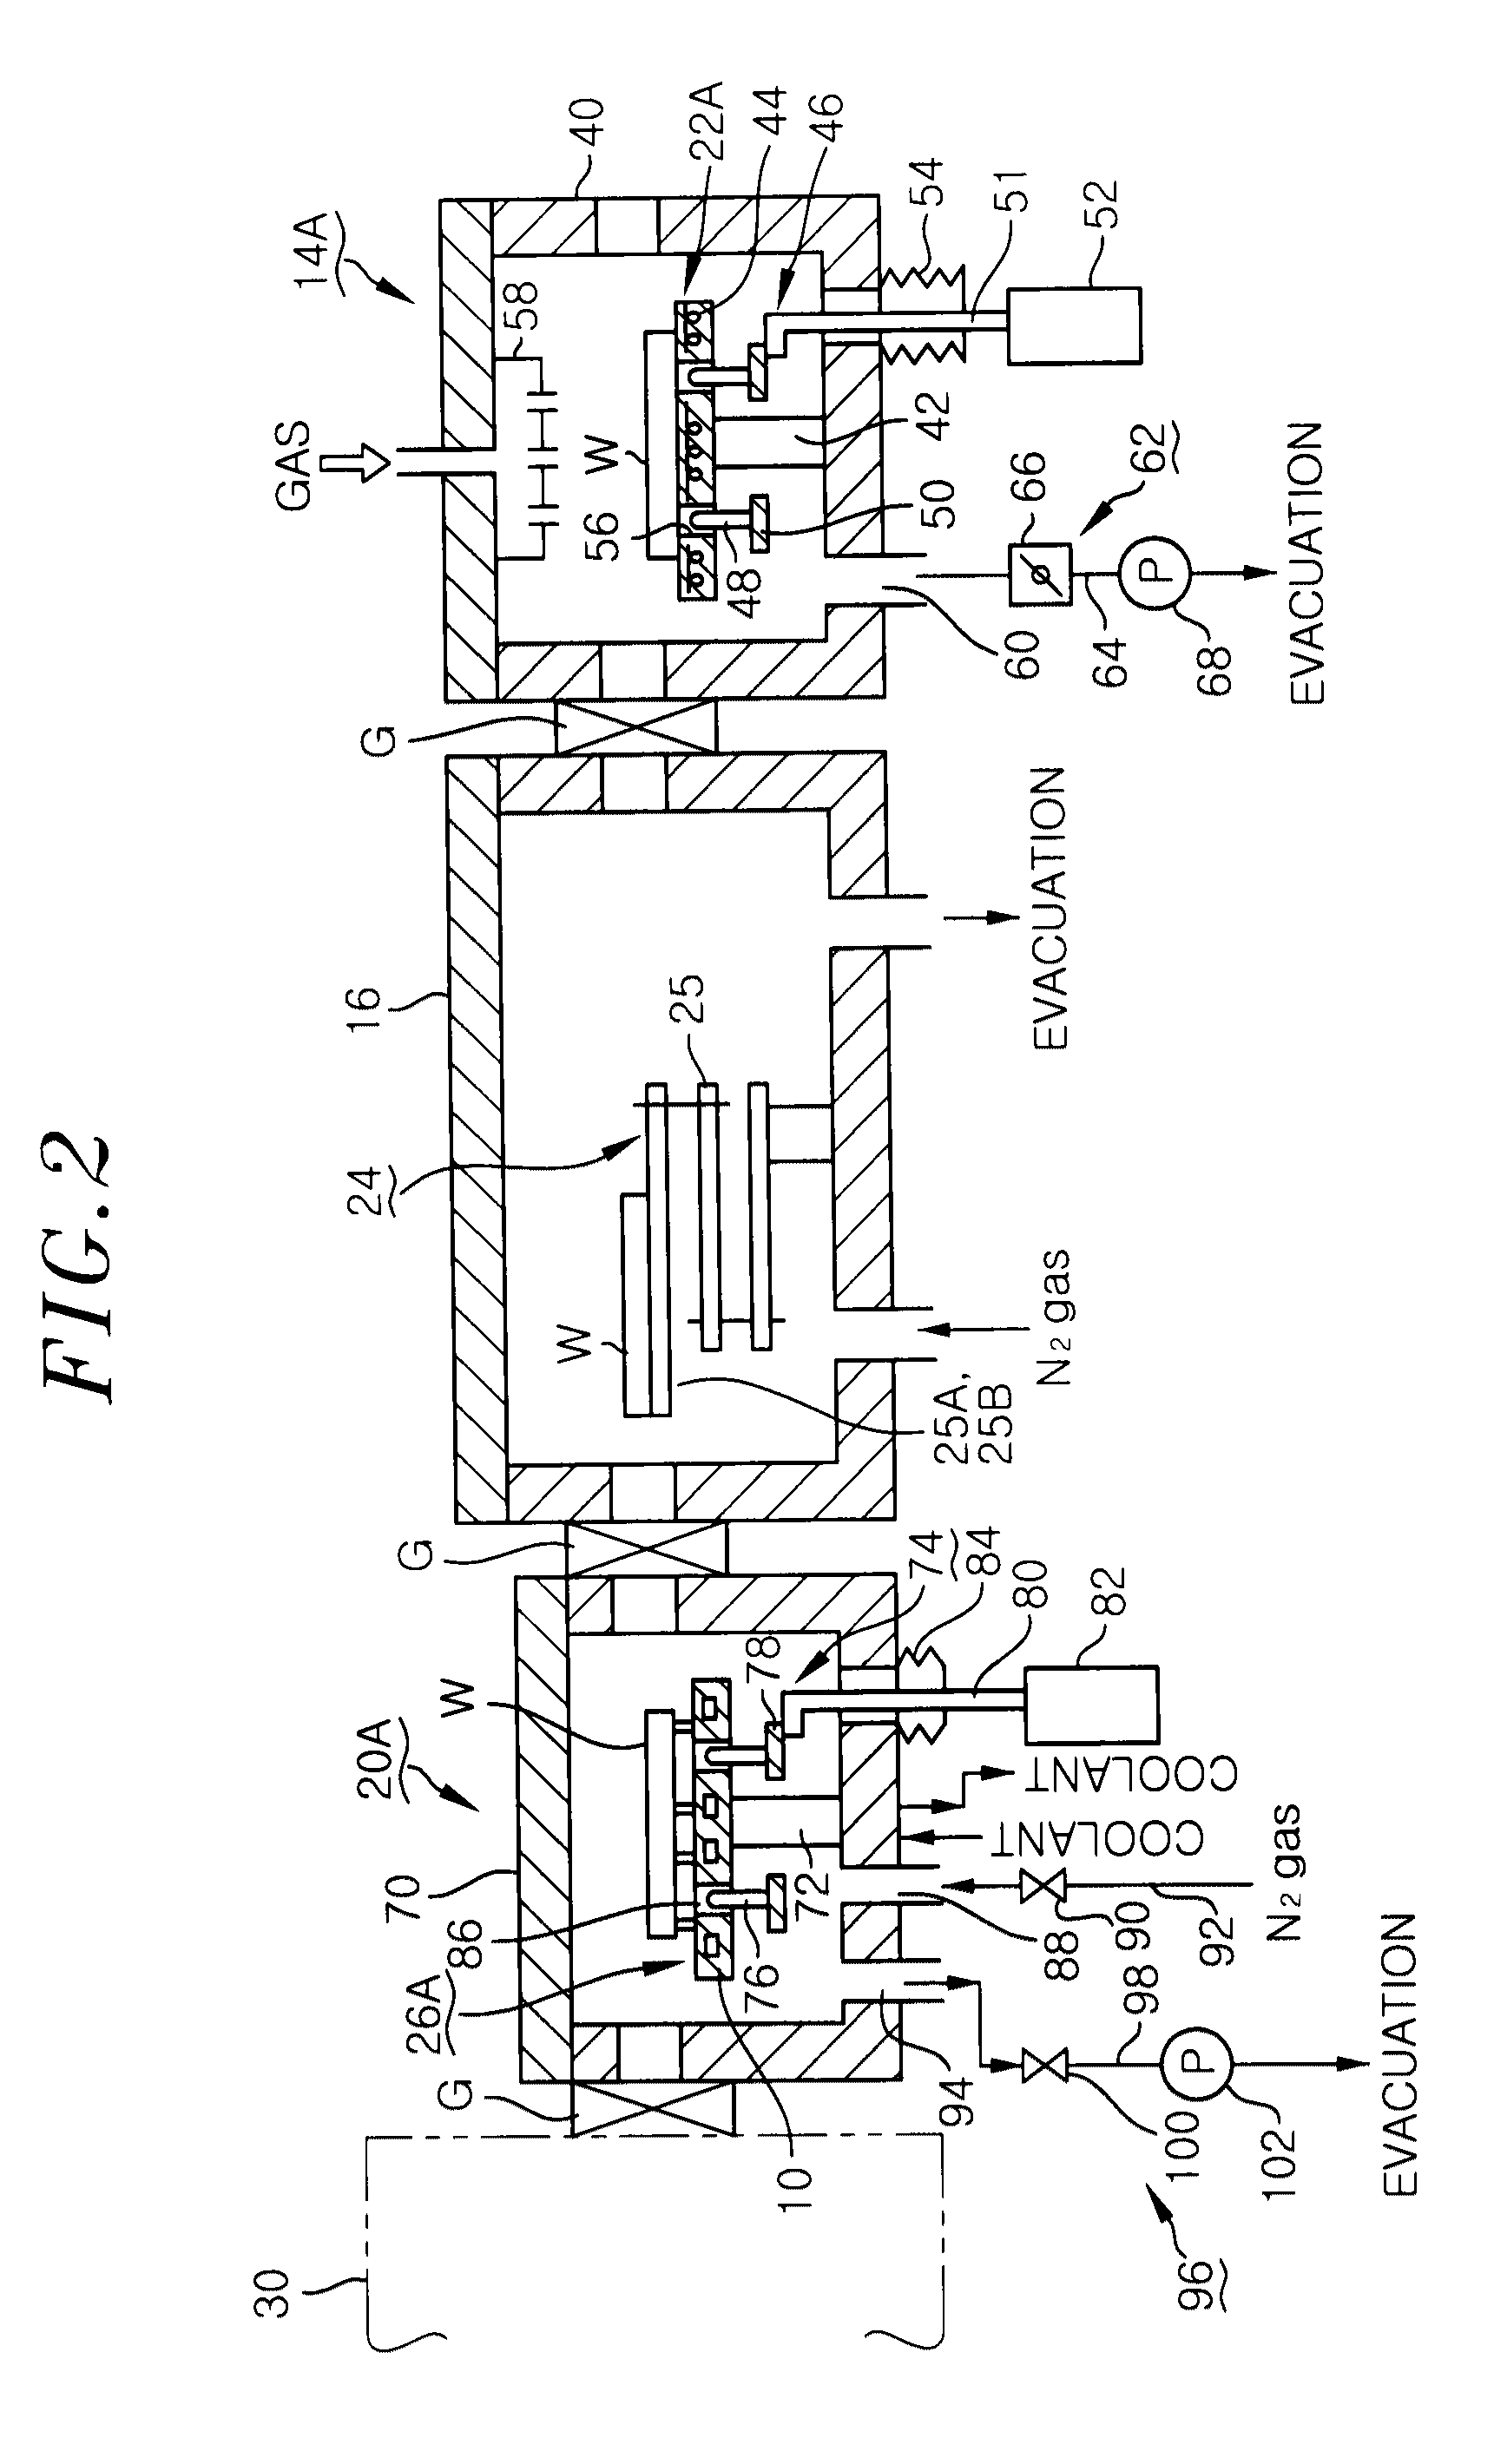 Support structure, load lock apparatus, processing apparatus and transfer mechanism